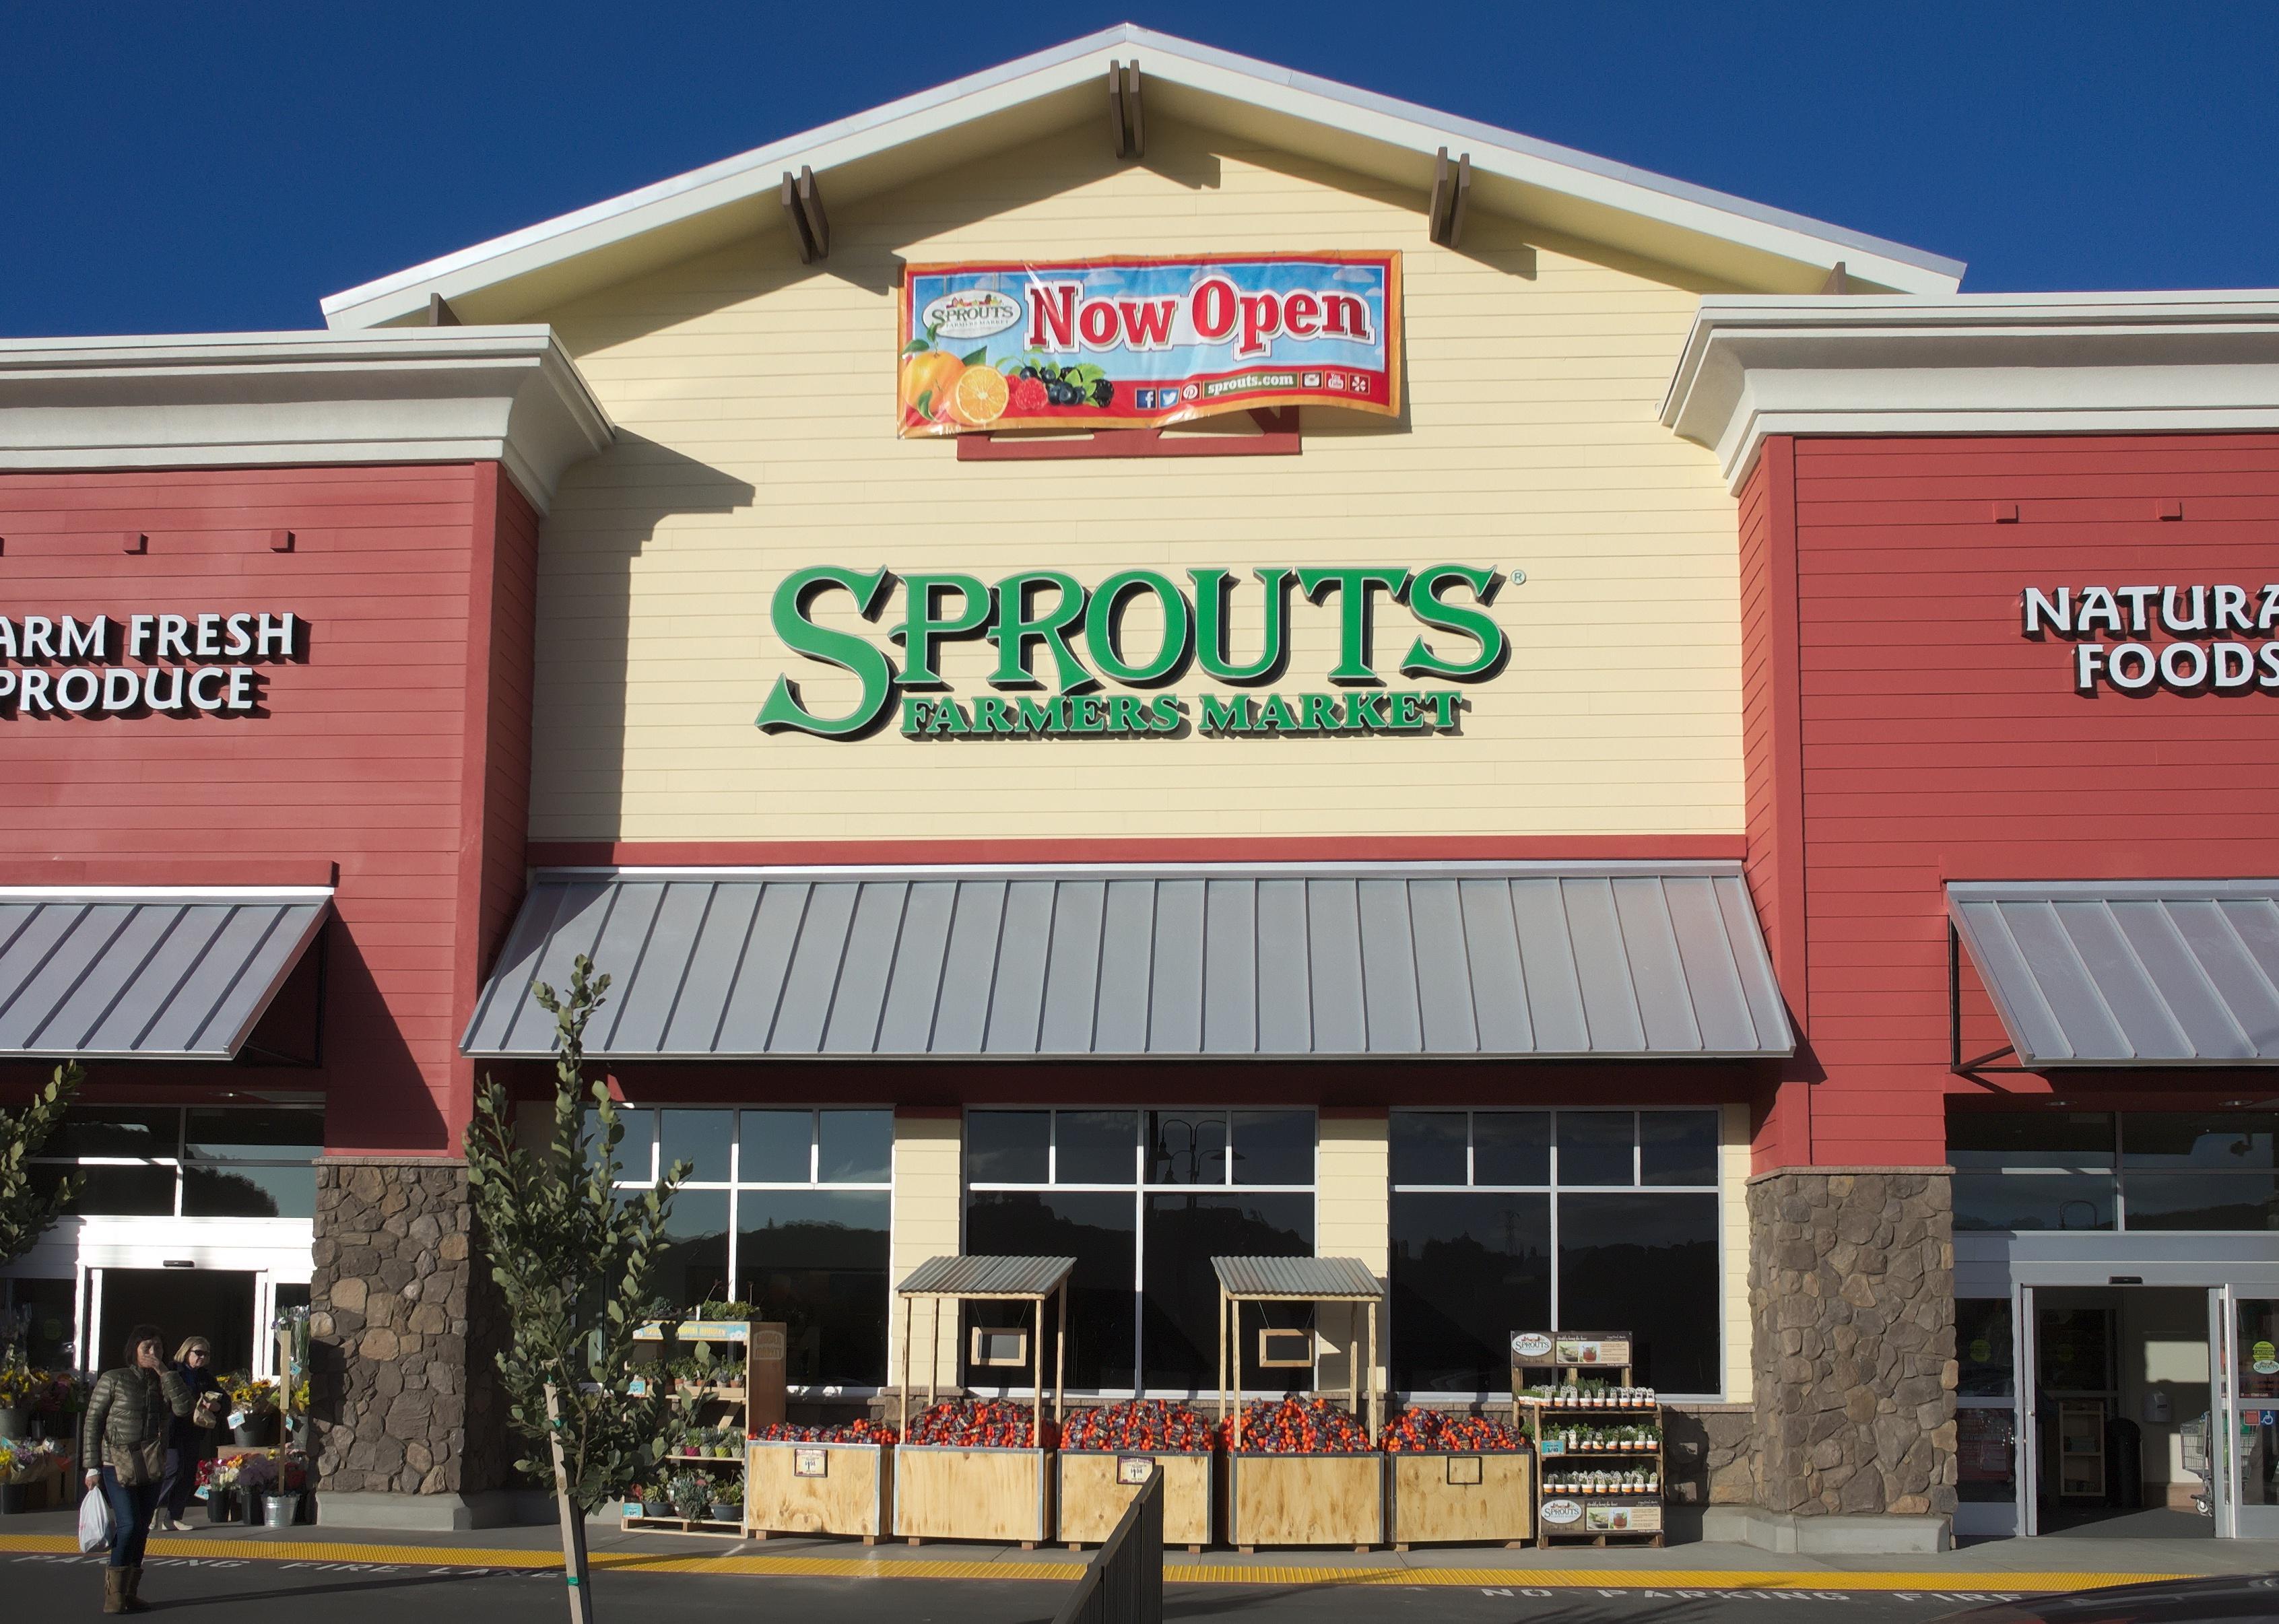 Sprouts Farmers Market storefront.